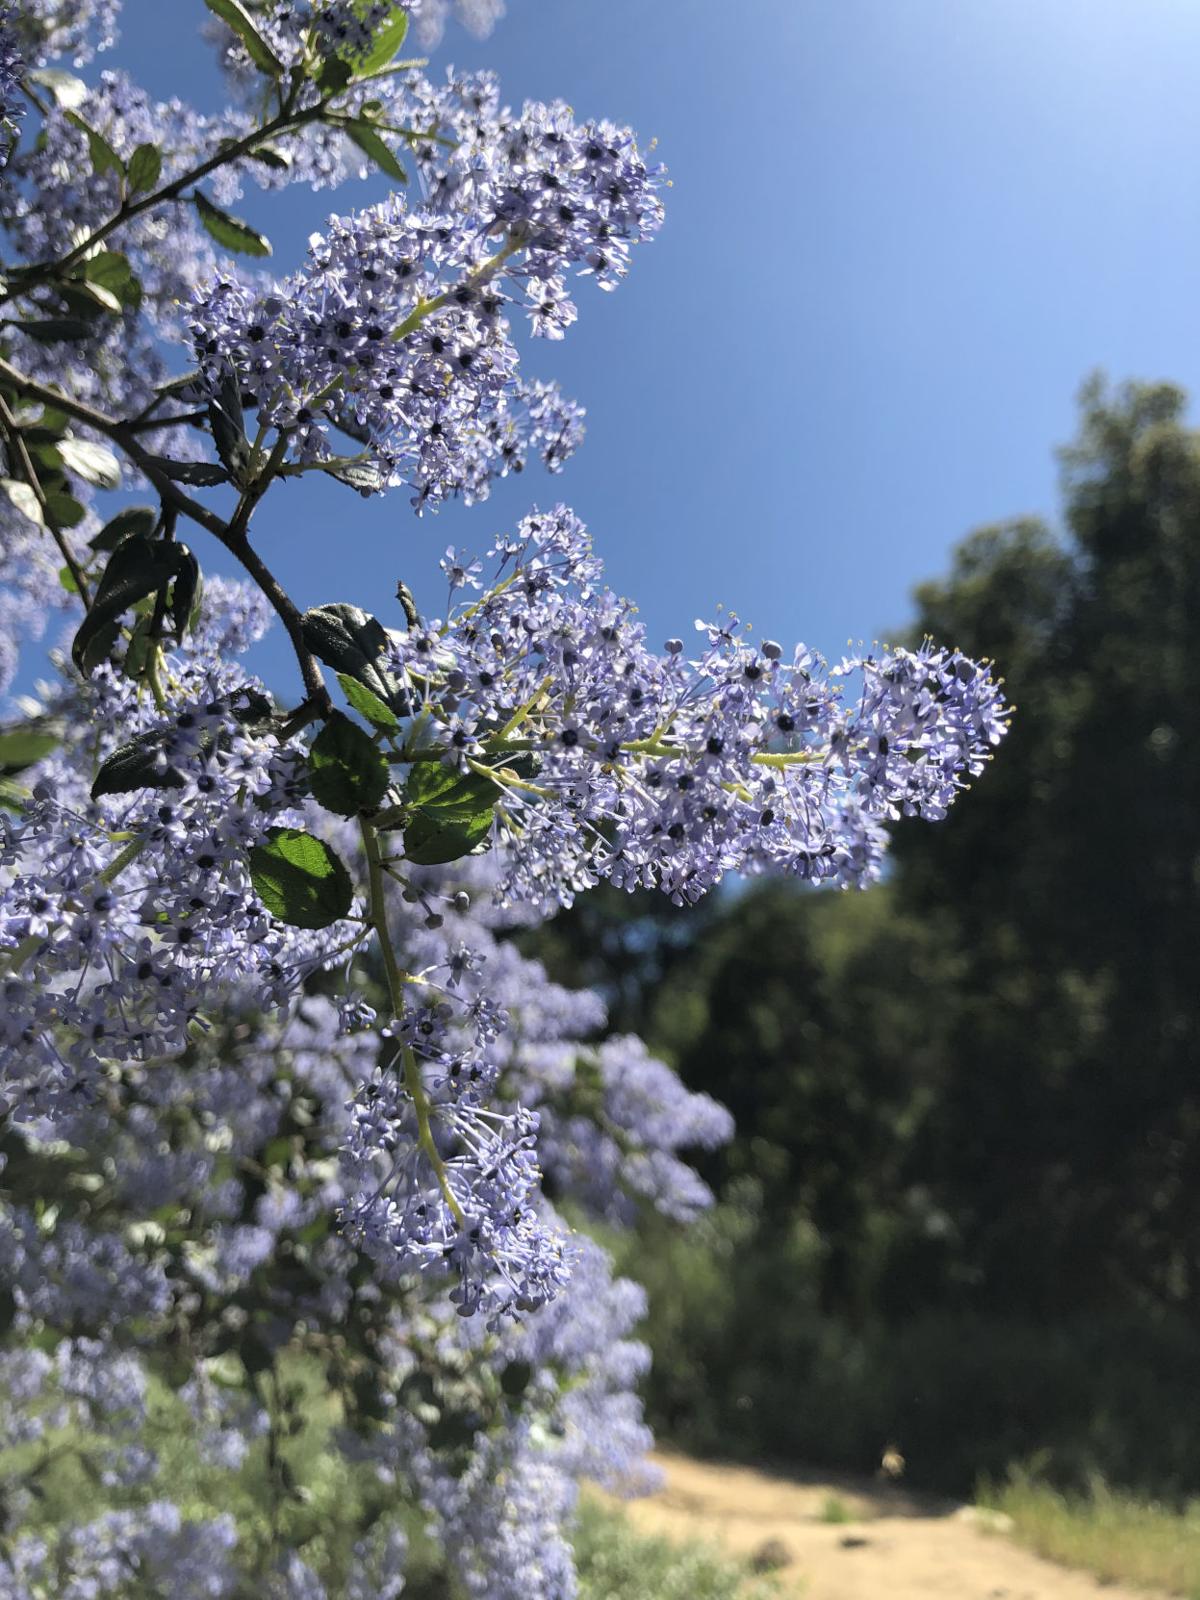 Pen in Hand: Wild Lilac: a beautiful native shrub that can clean your hands | Lifestyle | tehachapinews.com